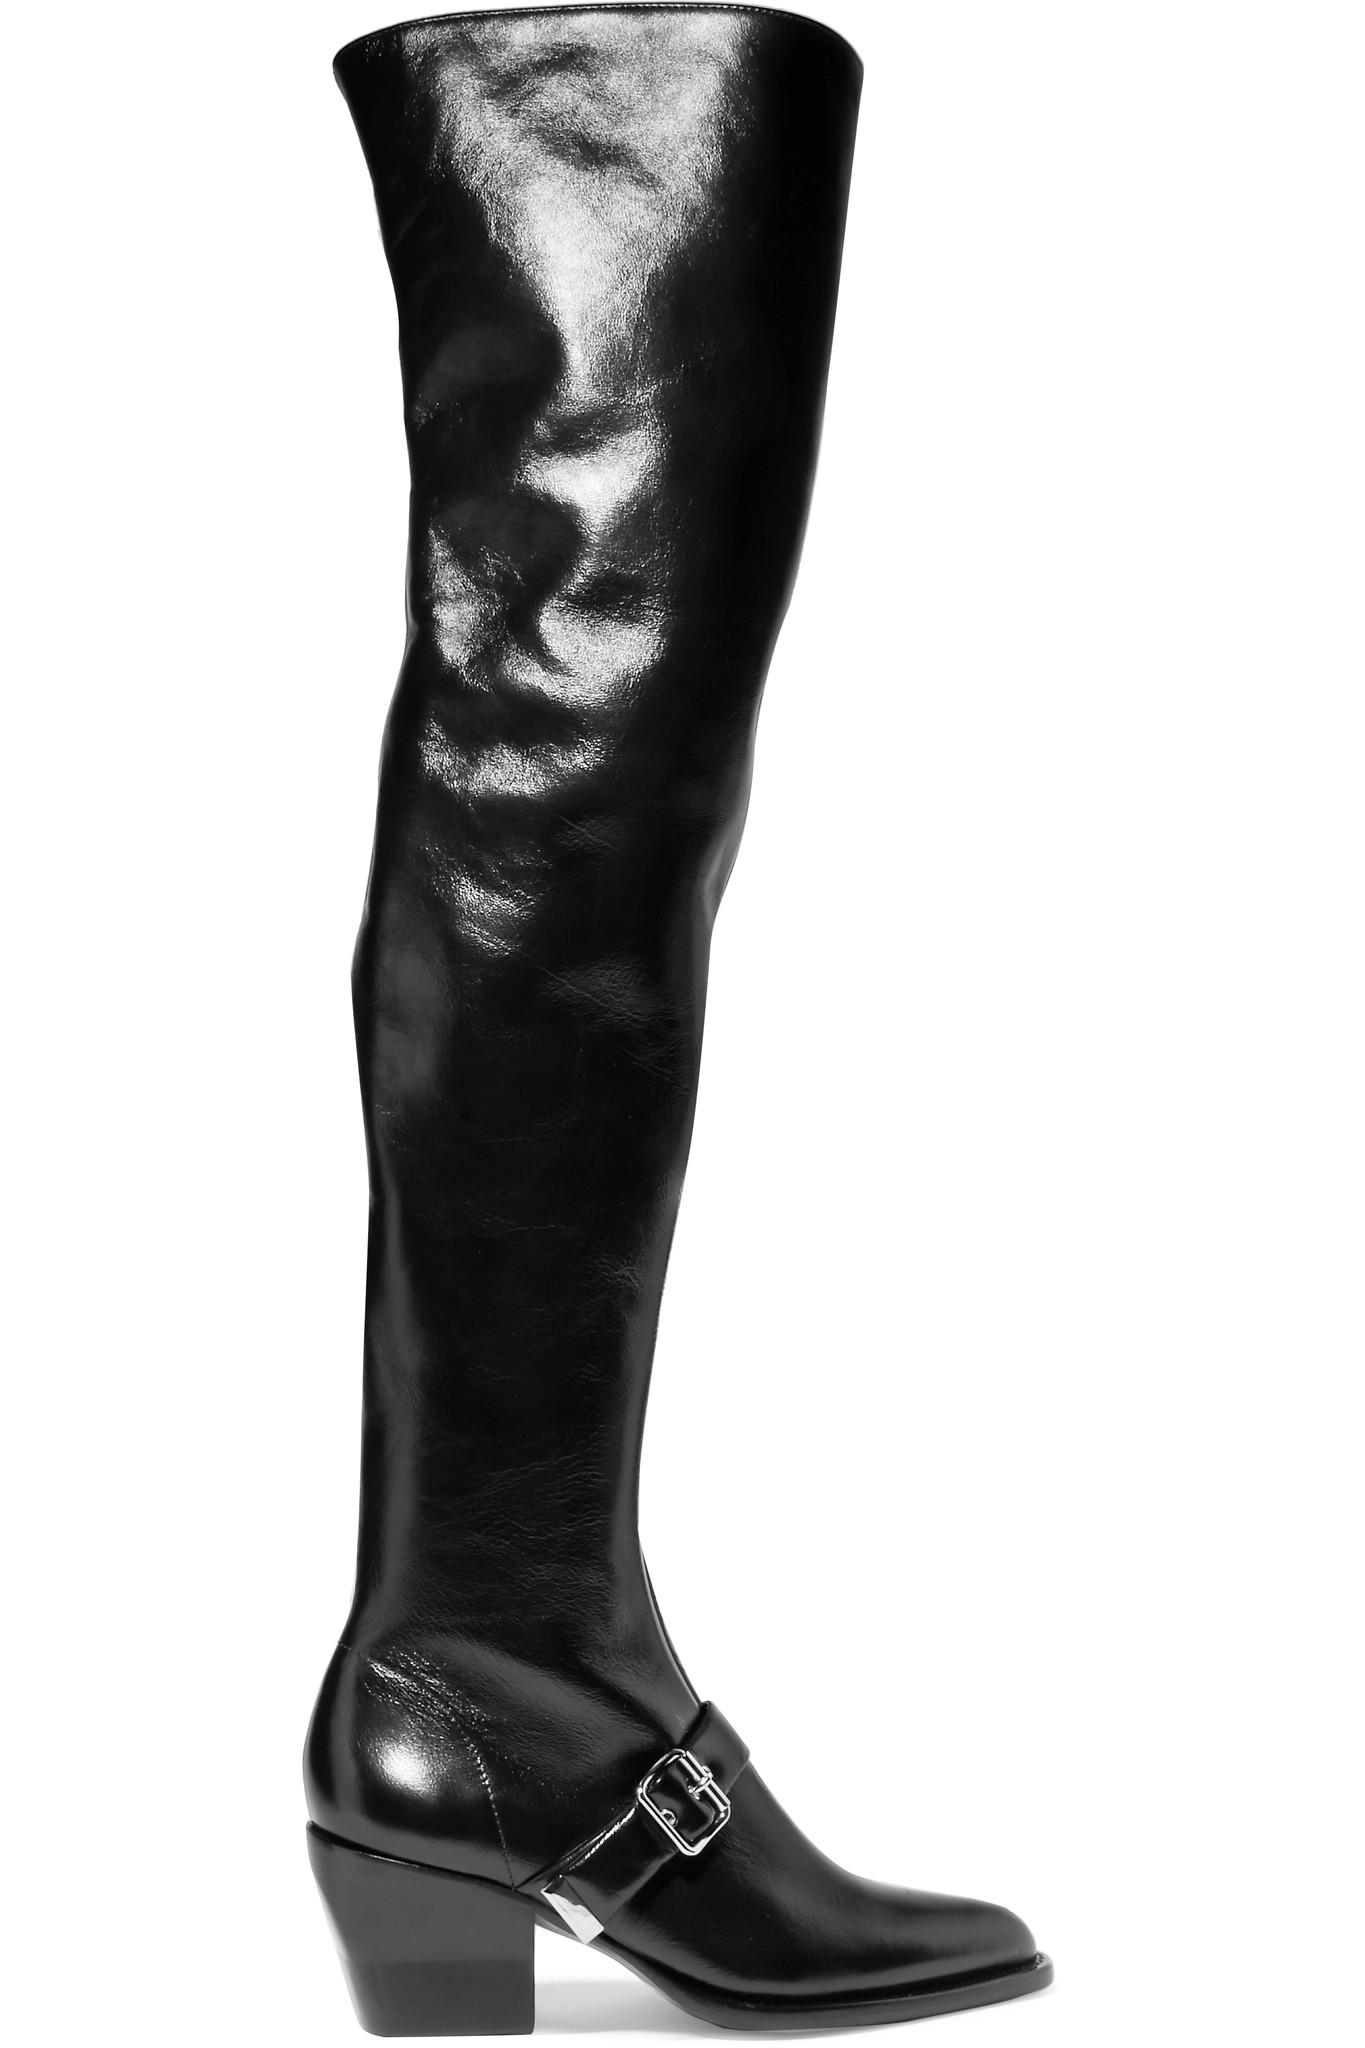 Chloé Rylee Leather Over-the-knee Boots in Black - Lyst